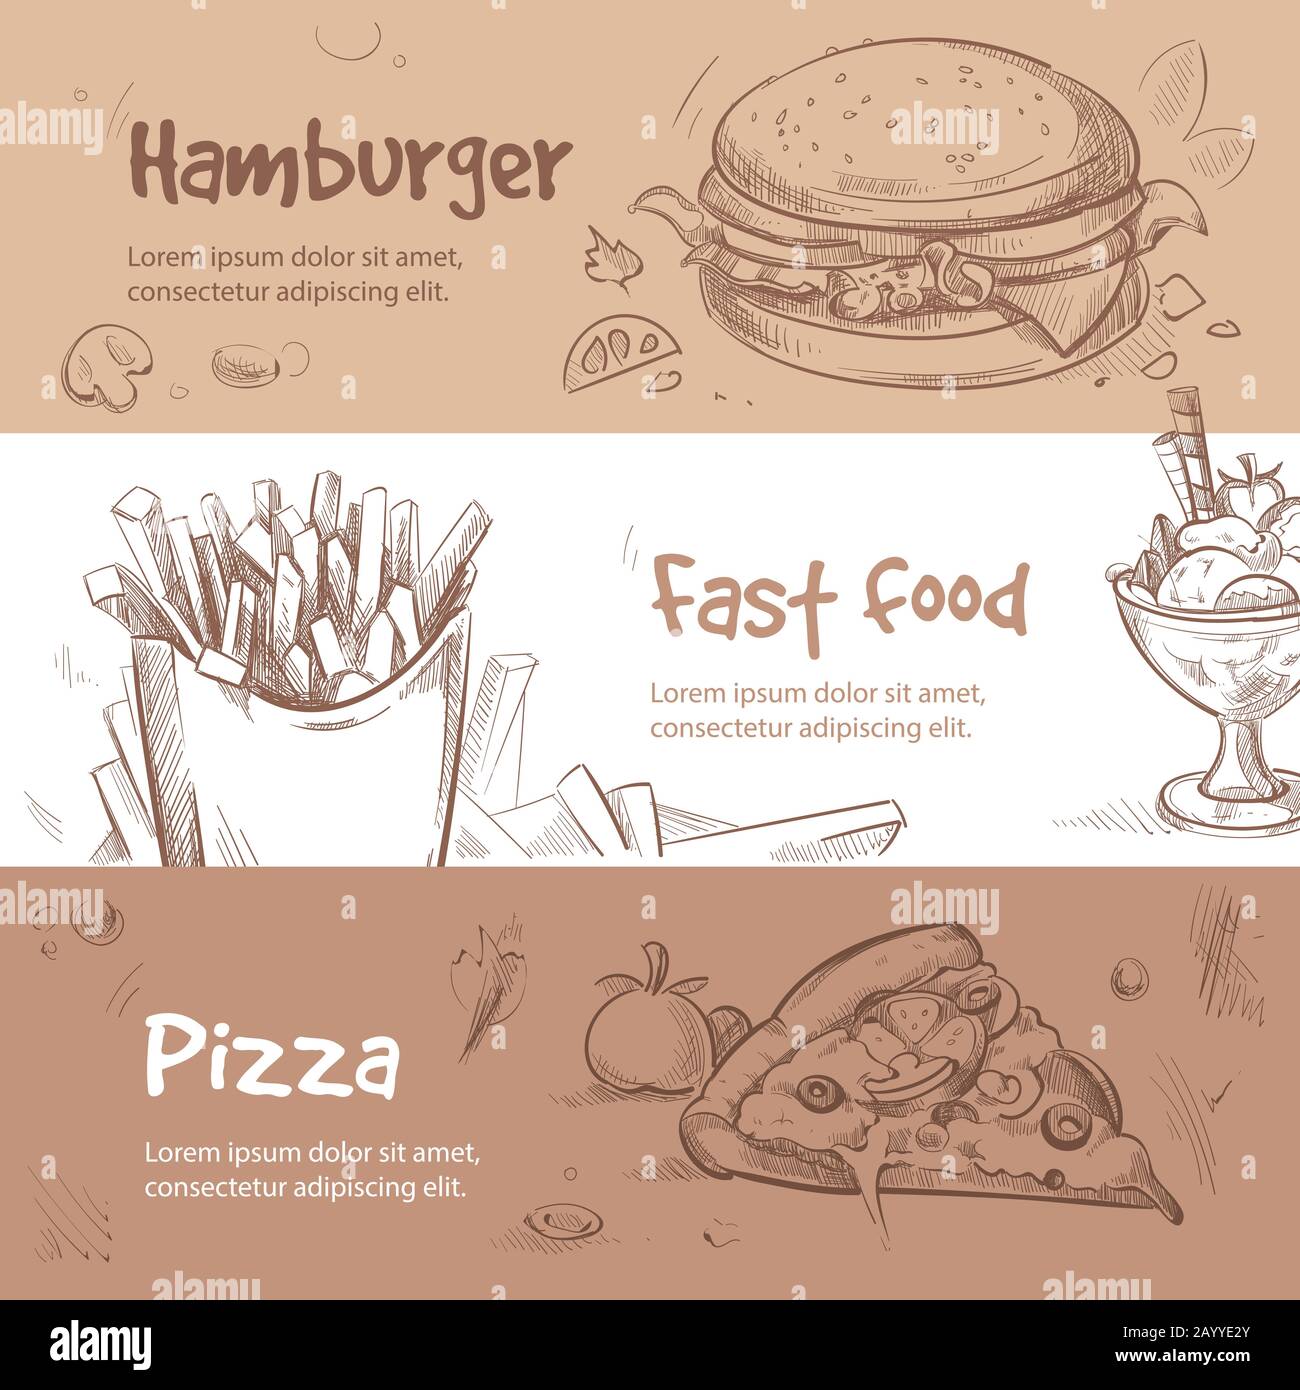 Vector banners of fast food design in hand drawn style. Bannner fast food and pizza for menu, illustration breakfast fast food Stock Vector